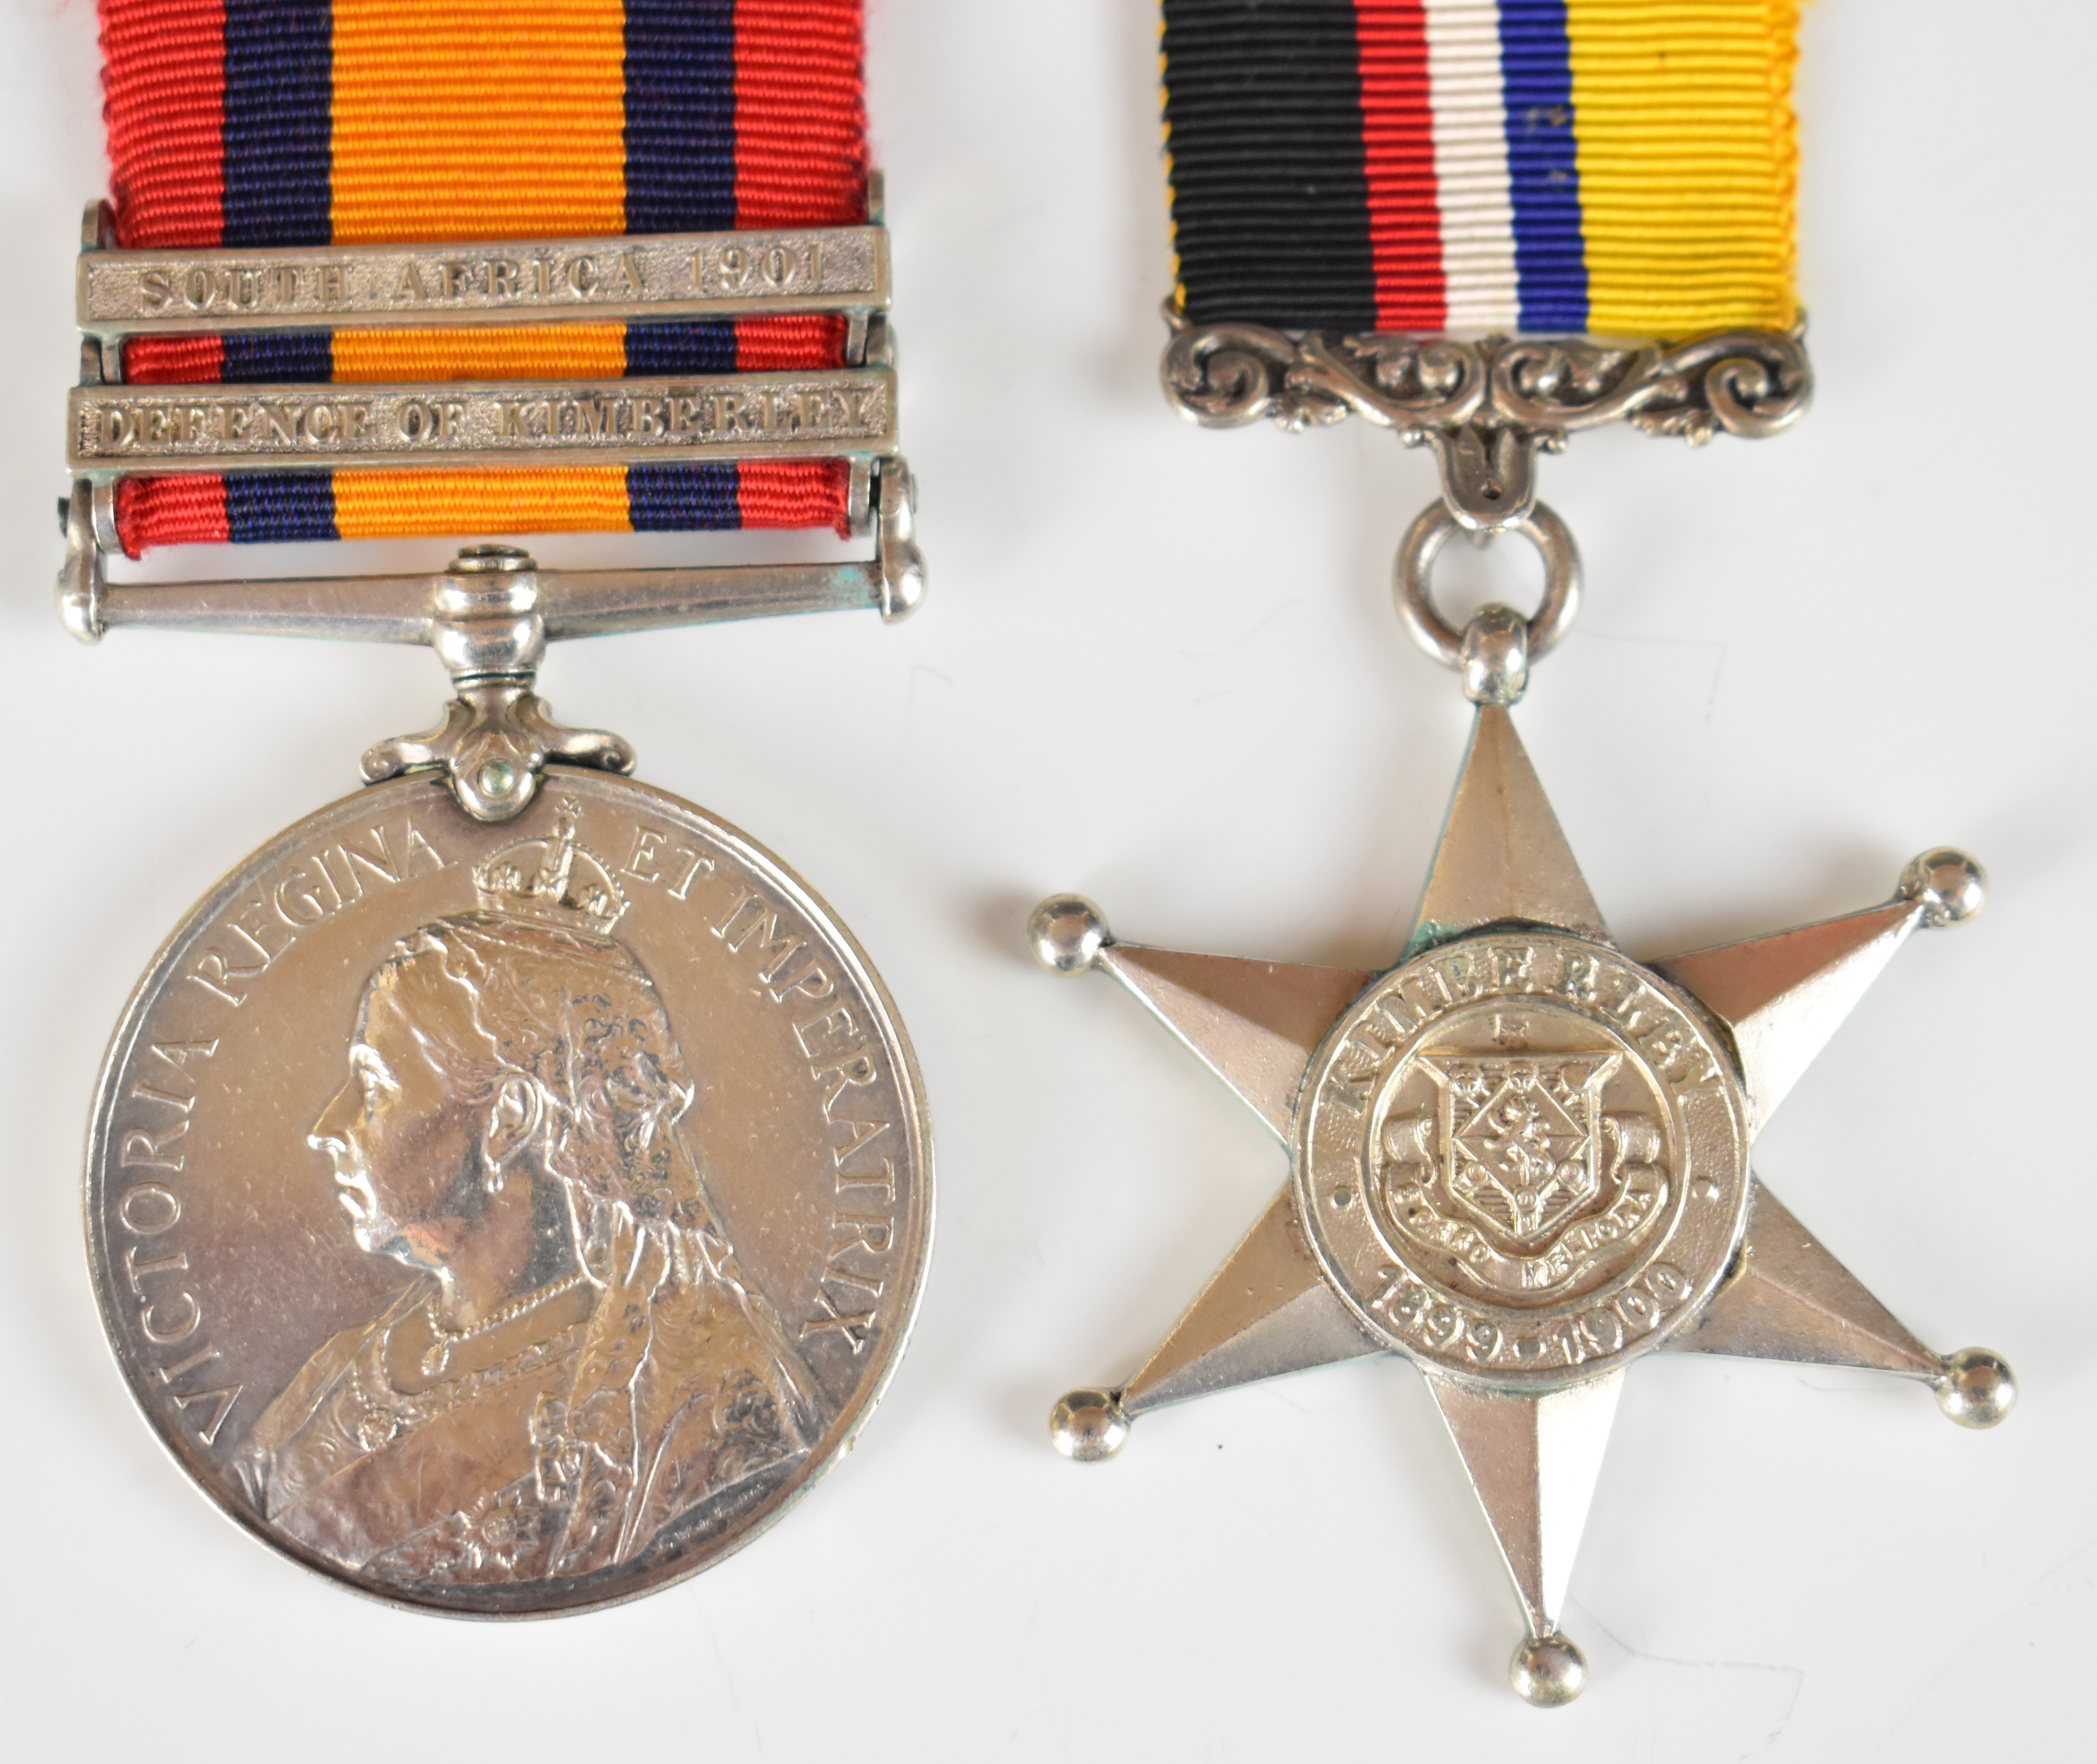 Queen's South Africa Medal with clasps for Defence of Kimberley and South Africa 1901 named to 828 - Image 13 of 22